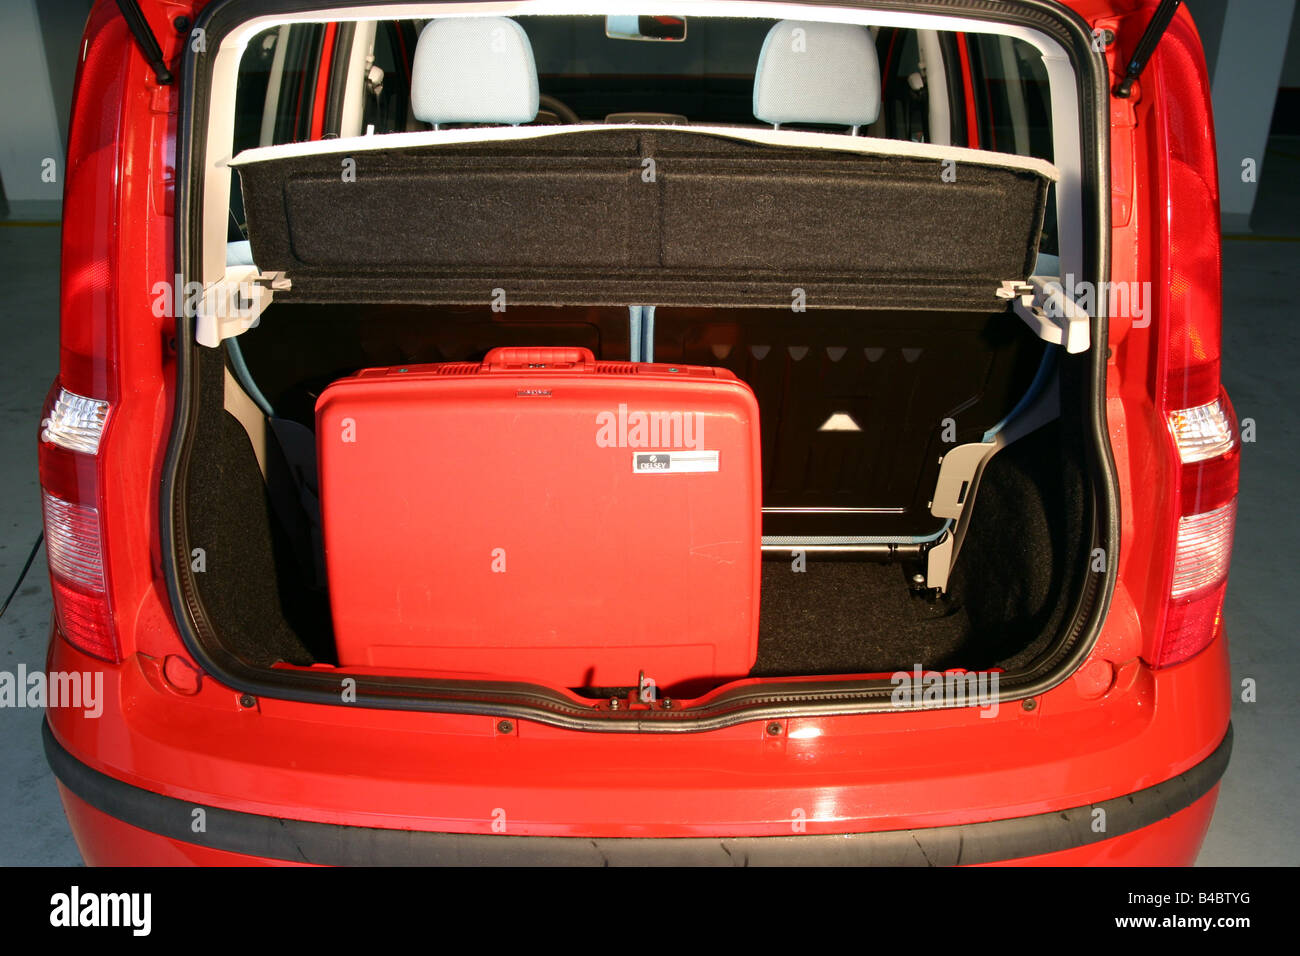 Car, Fiat Panda 1.2 8V Emotion, Miniapprox.s, Limousine, model year 2003-,  red, view into boot, technique/accessory, accessories Stock Photo - Alamy